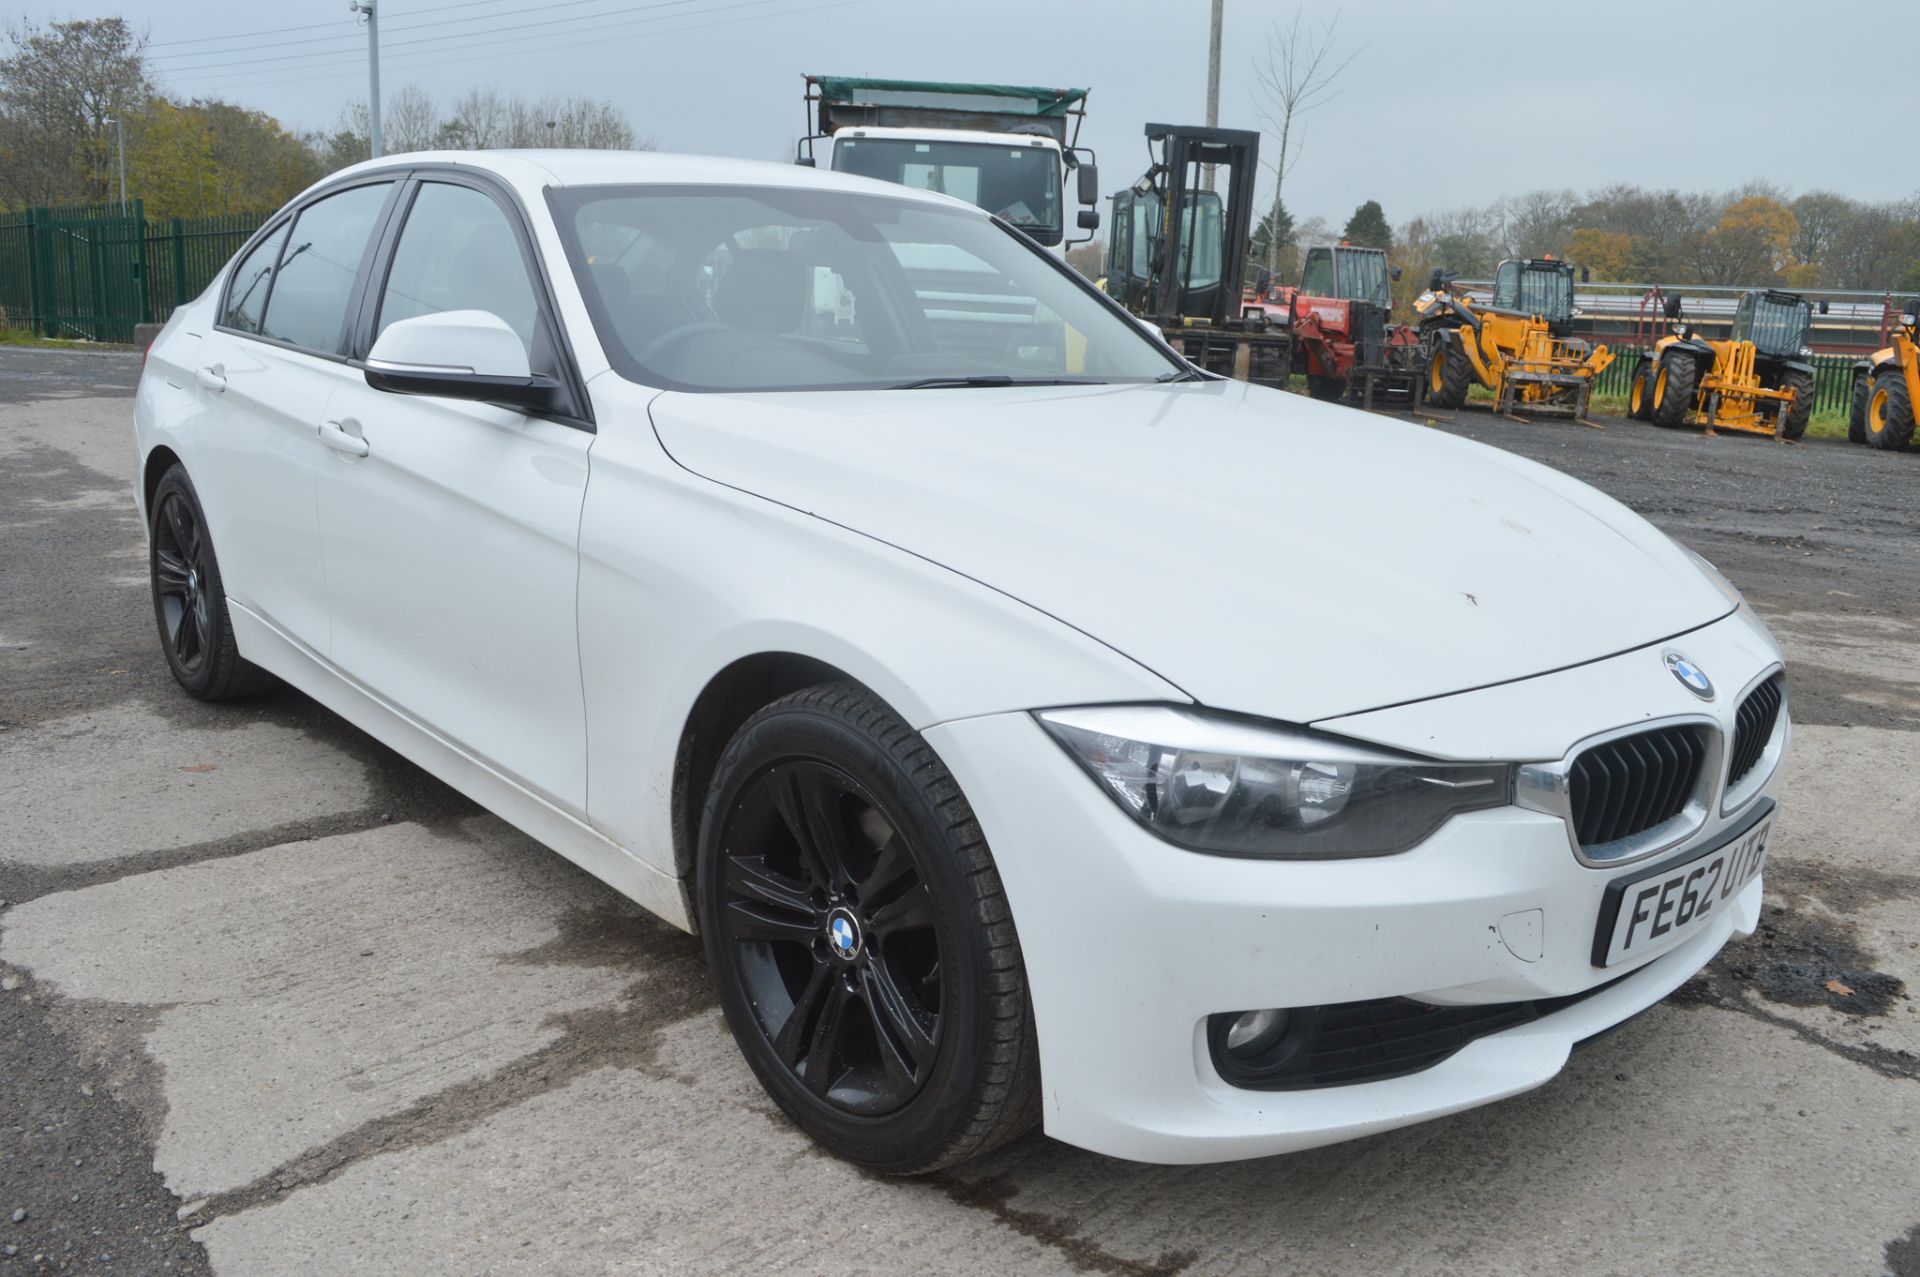 BMW 3 Series 2.0 320d Sport 4dr automatic saloon car  Registration Number: FE62 UTB Date of - Image 2 of 10